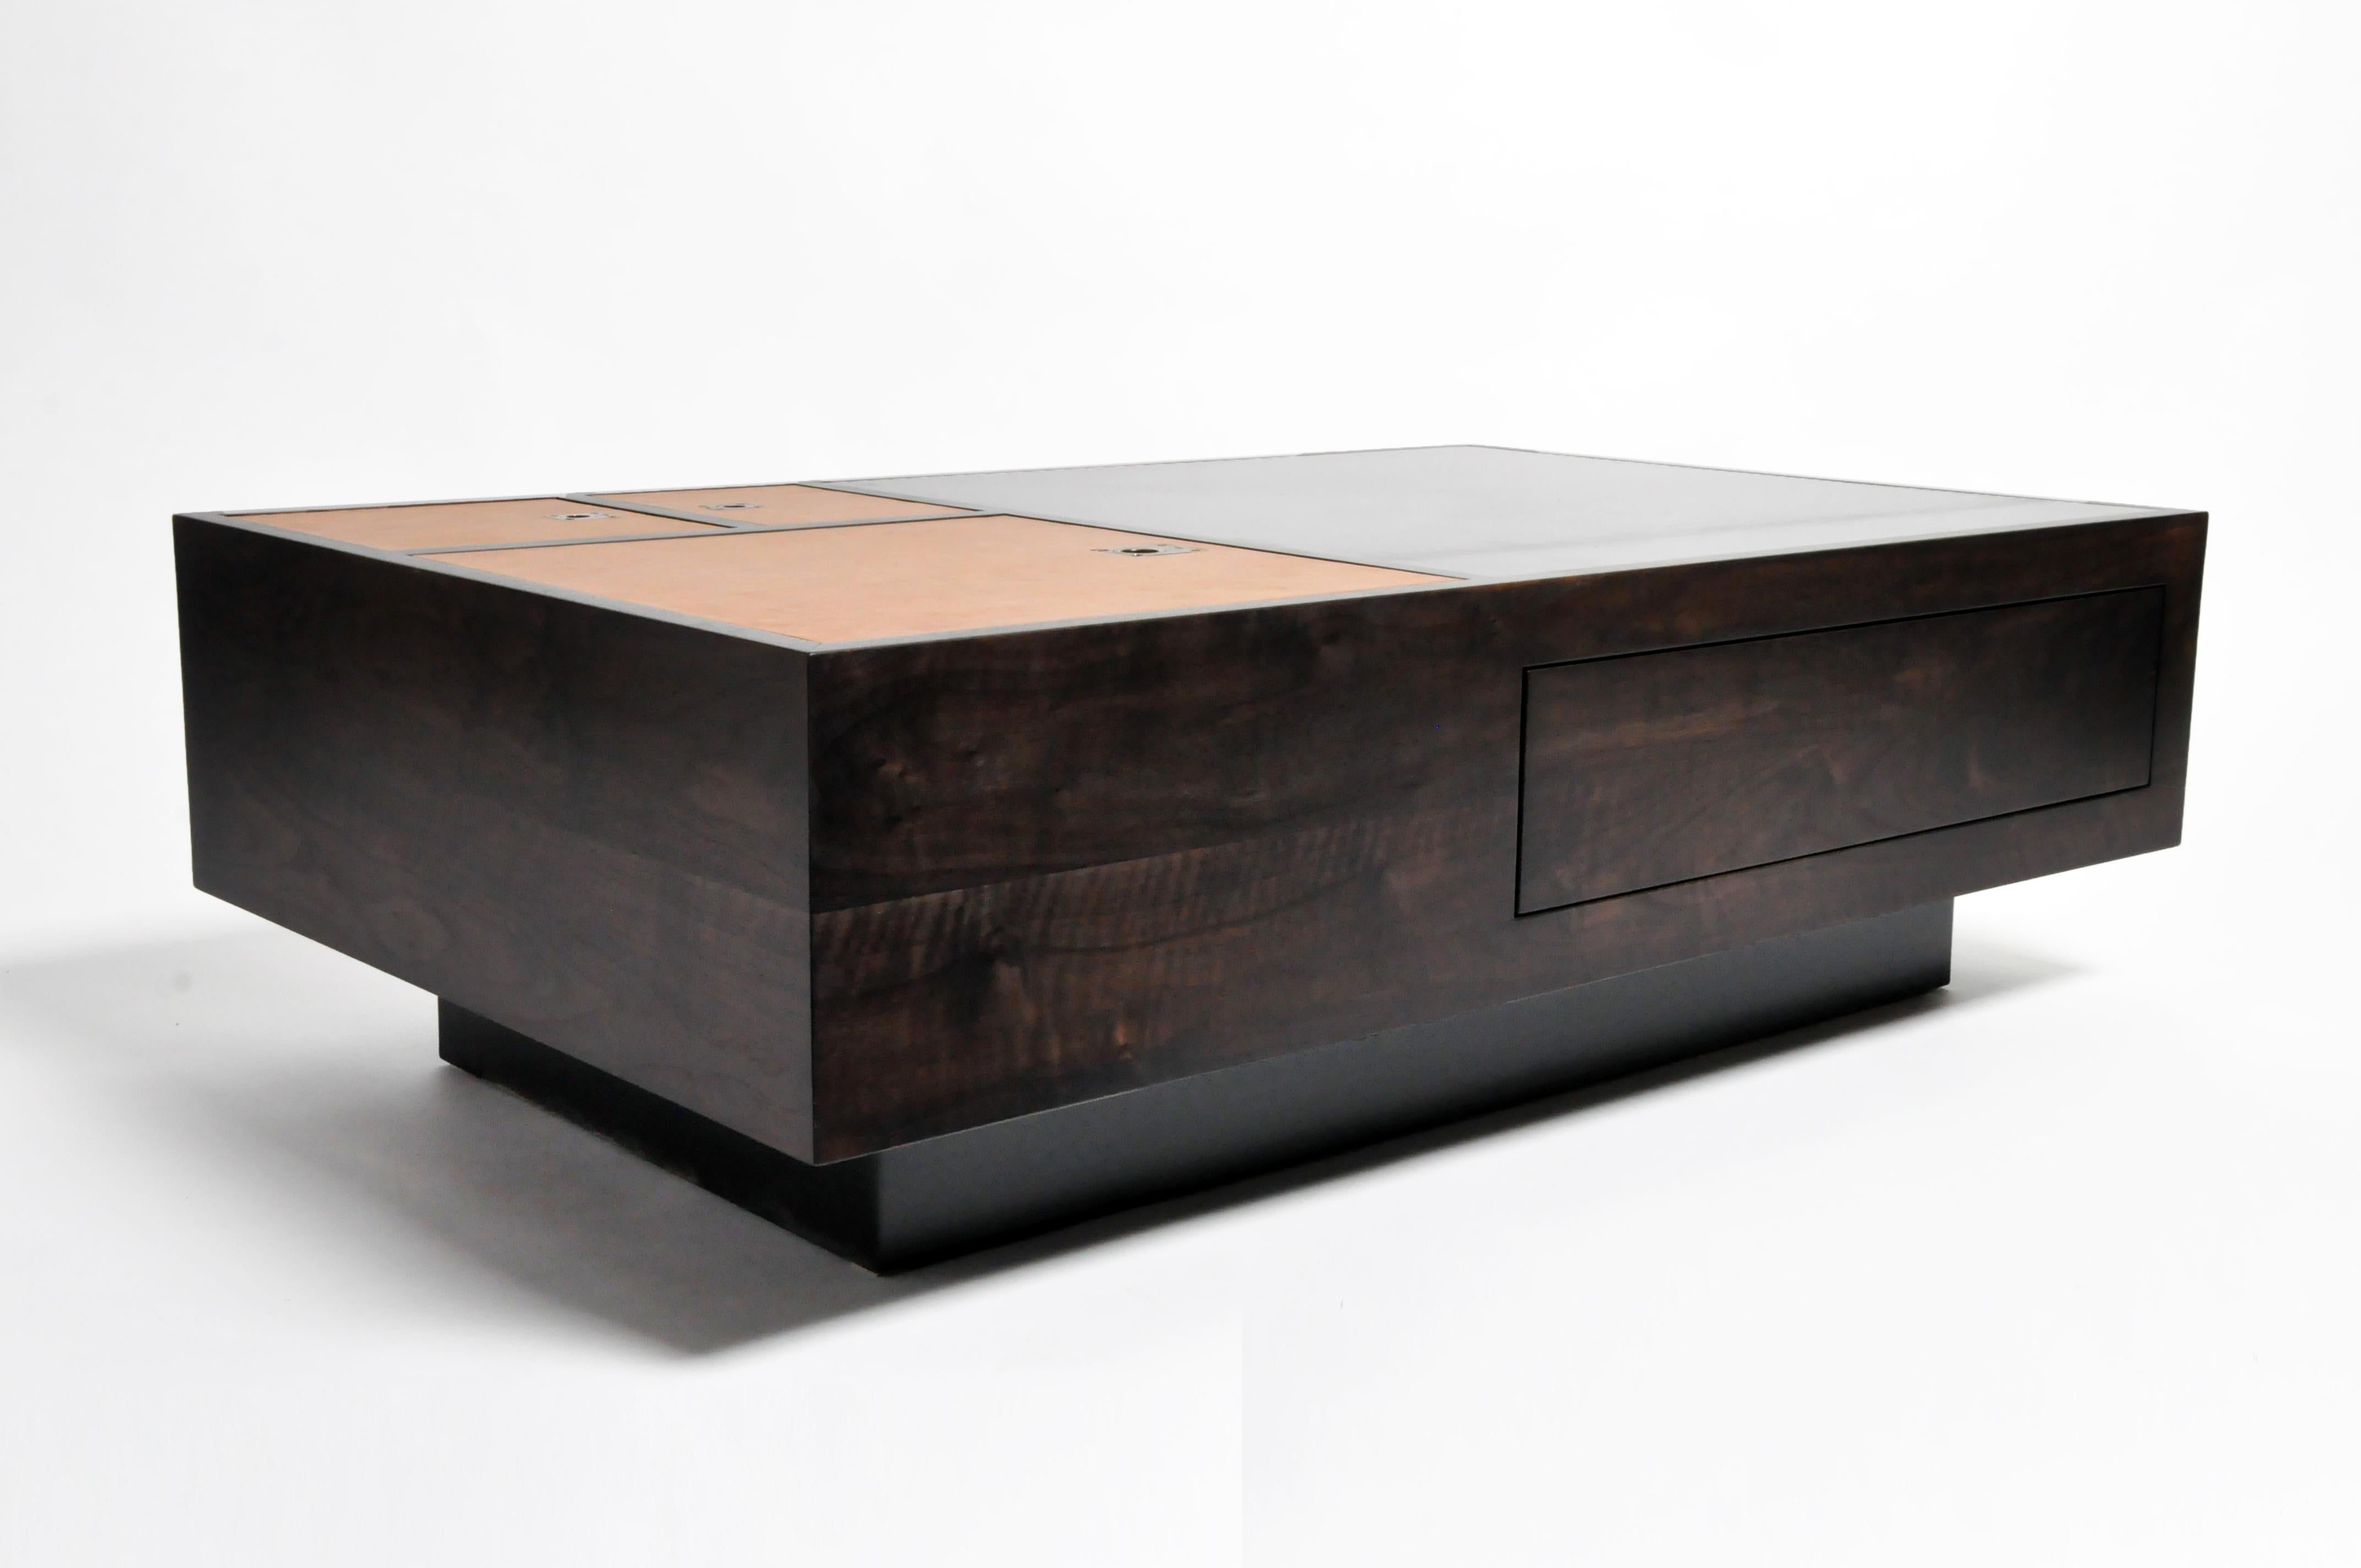 Introducing the GTR4 Flex Table by The Golden Triangle. Inspired by British campaign furniture, it’s made to go anywhere. It has a solid Walnut frame and a leather and steel top. Surface doors with flush mount fittings lift up to reveal deep storage